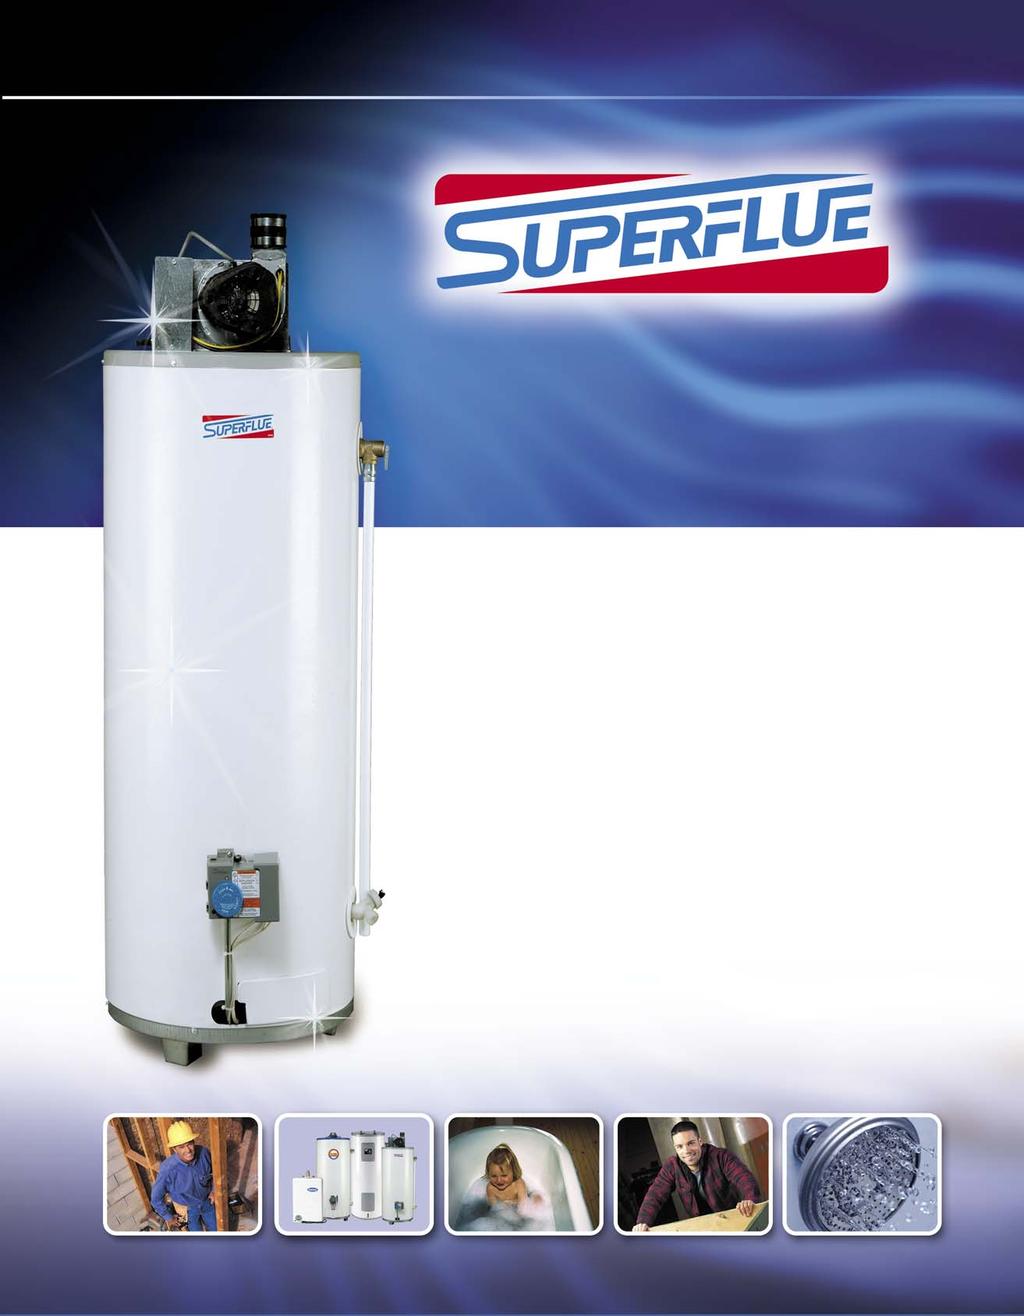 Superior, ultra-quiet power vent water heaters Give your customers ultimate satisfaction with endless hot water, quiet operation, reliability and performance that comes from more than 150 years in